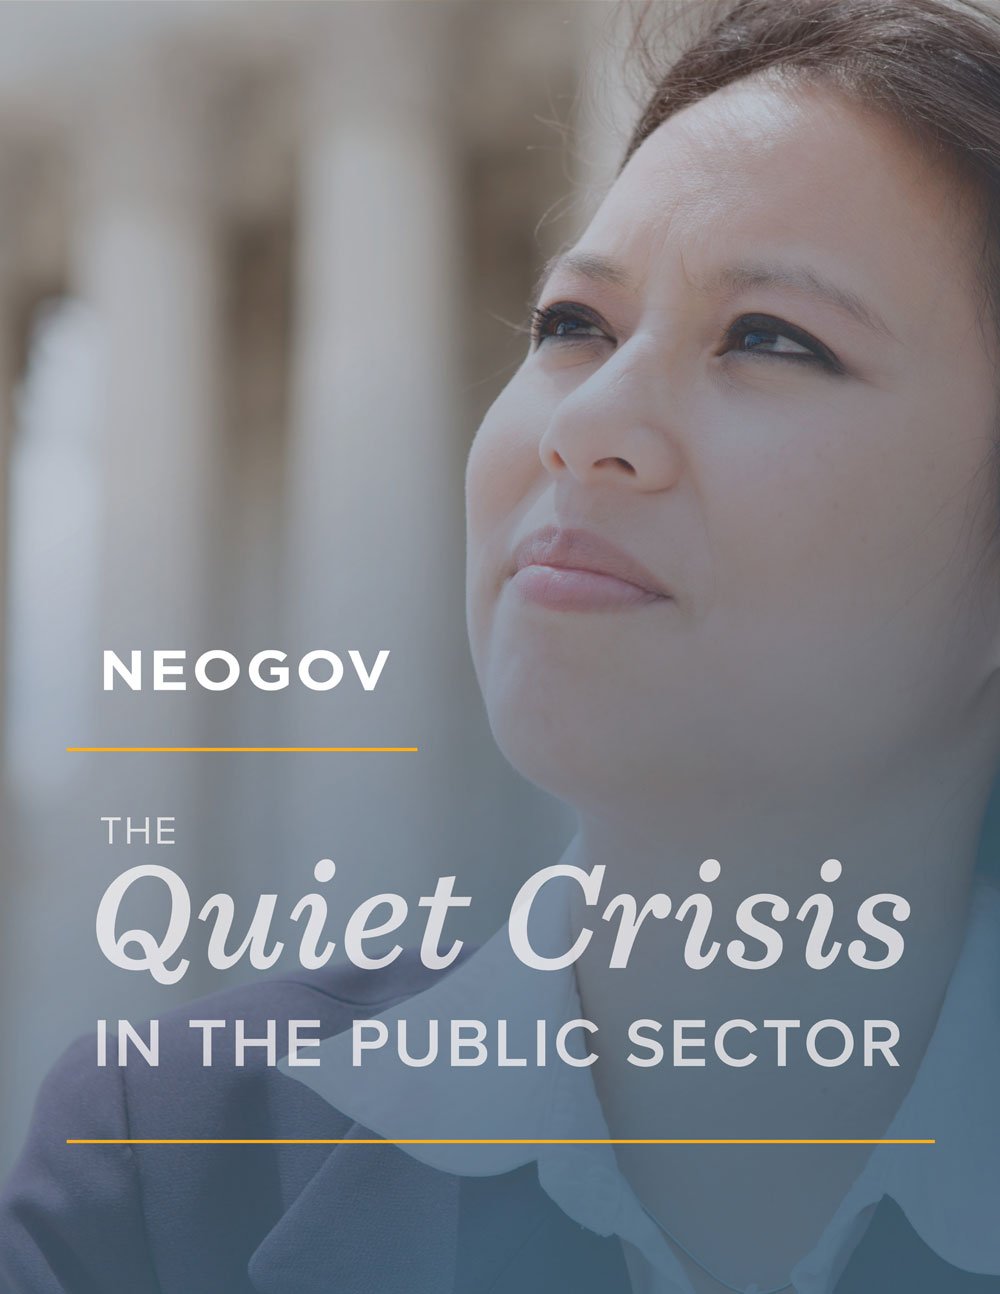 The Quiet Crisis in the Public Sector